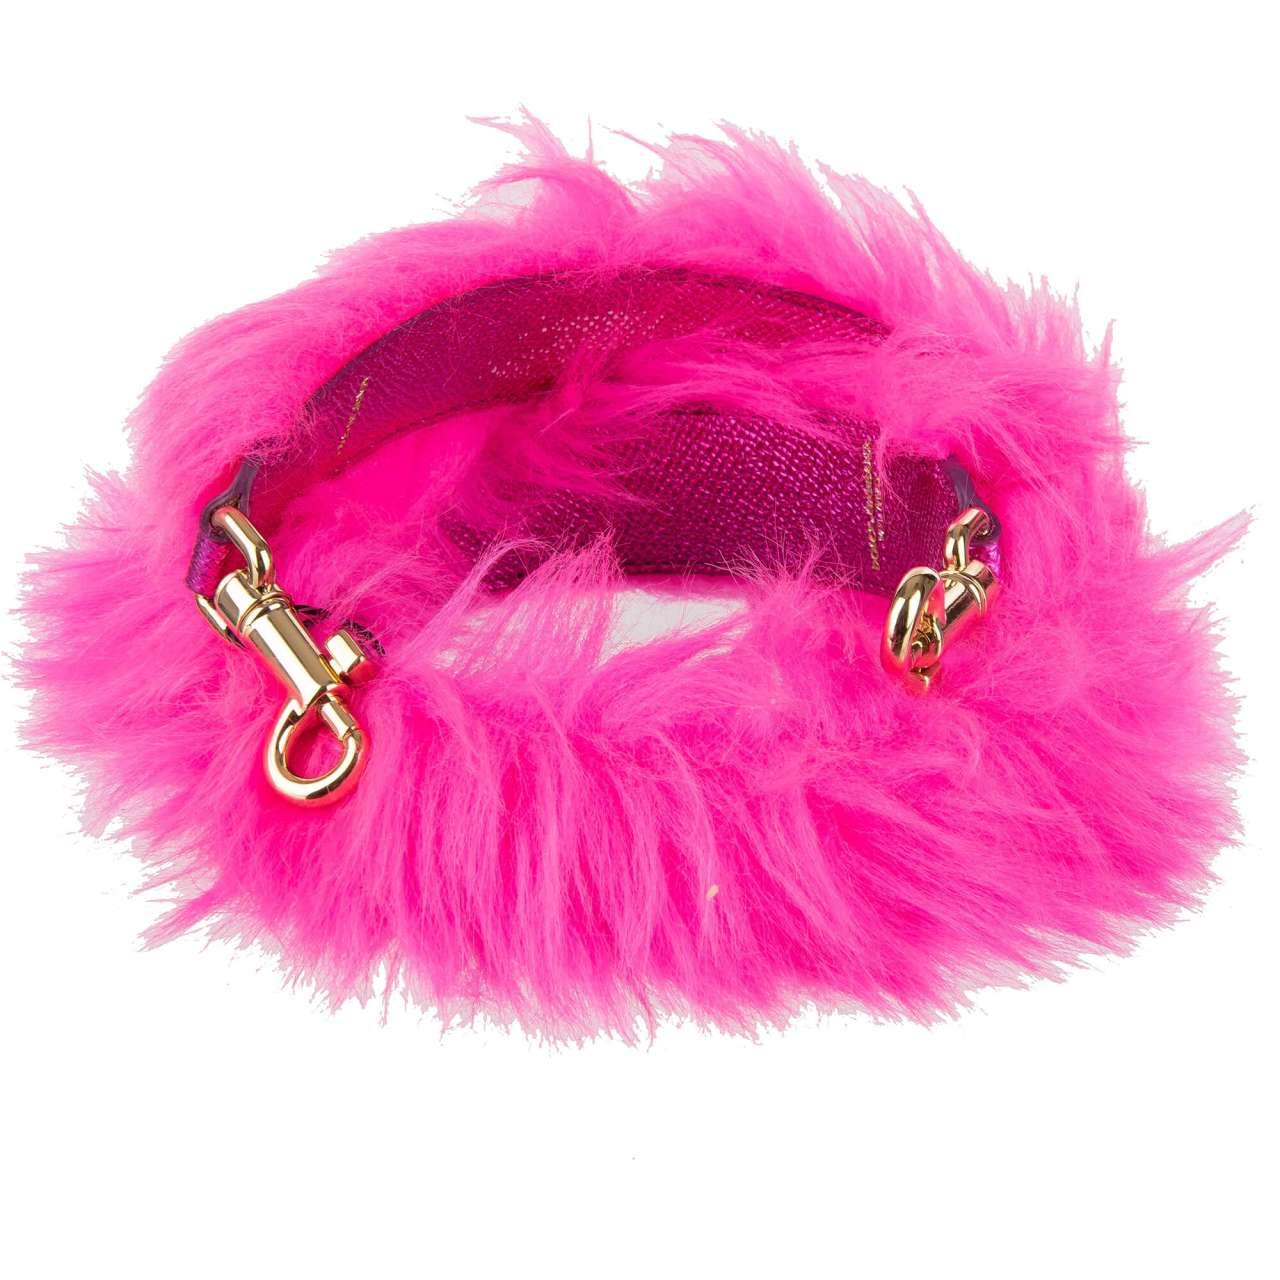 - Dauphine leather and faux fur bag Strap / Handle in pink by DOLCE & GABBANA - Former RRP: EUR 495 - New with Tag - MADE IN ITALY - Model: BI0938-8L400 [0210] - Material: 50% Calfskin, 50% Faux fur - Color: Pink - Length: appr. 68 cm - Width: appr.